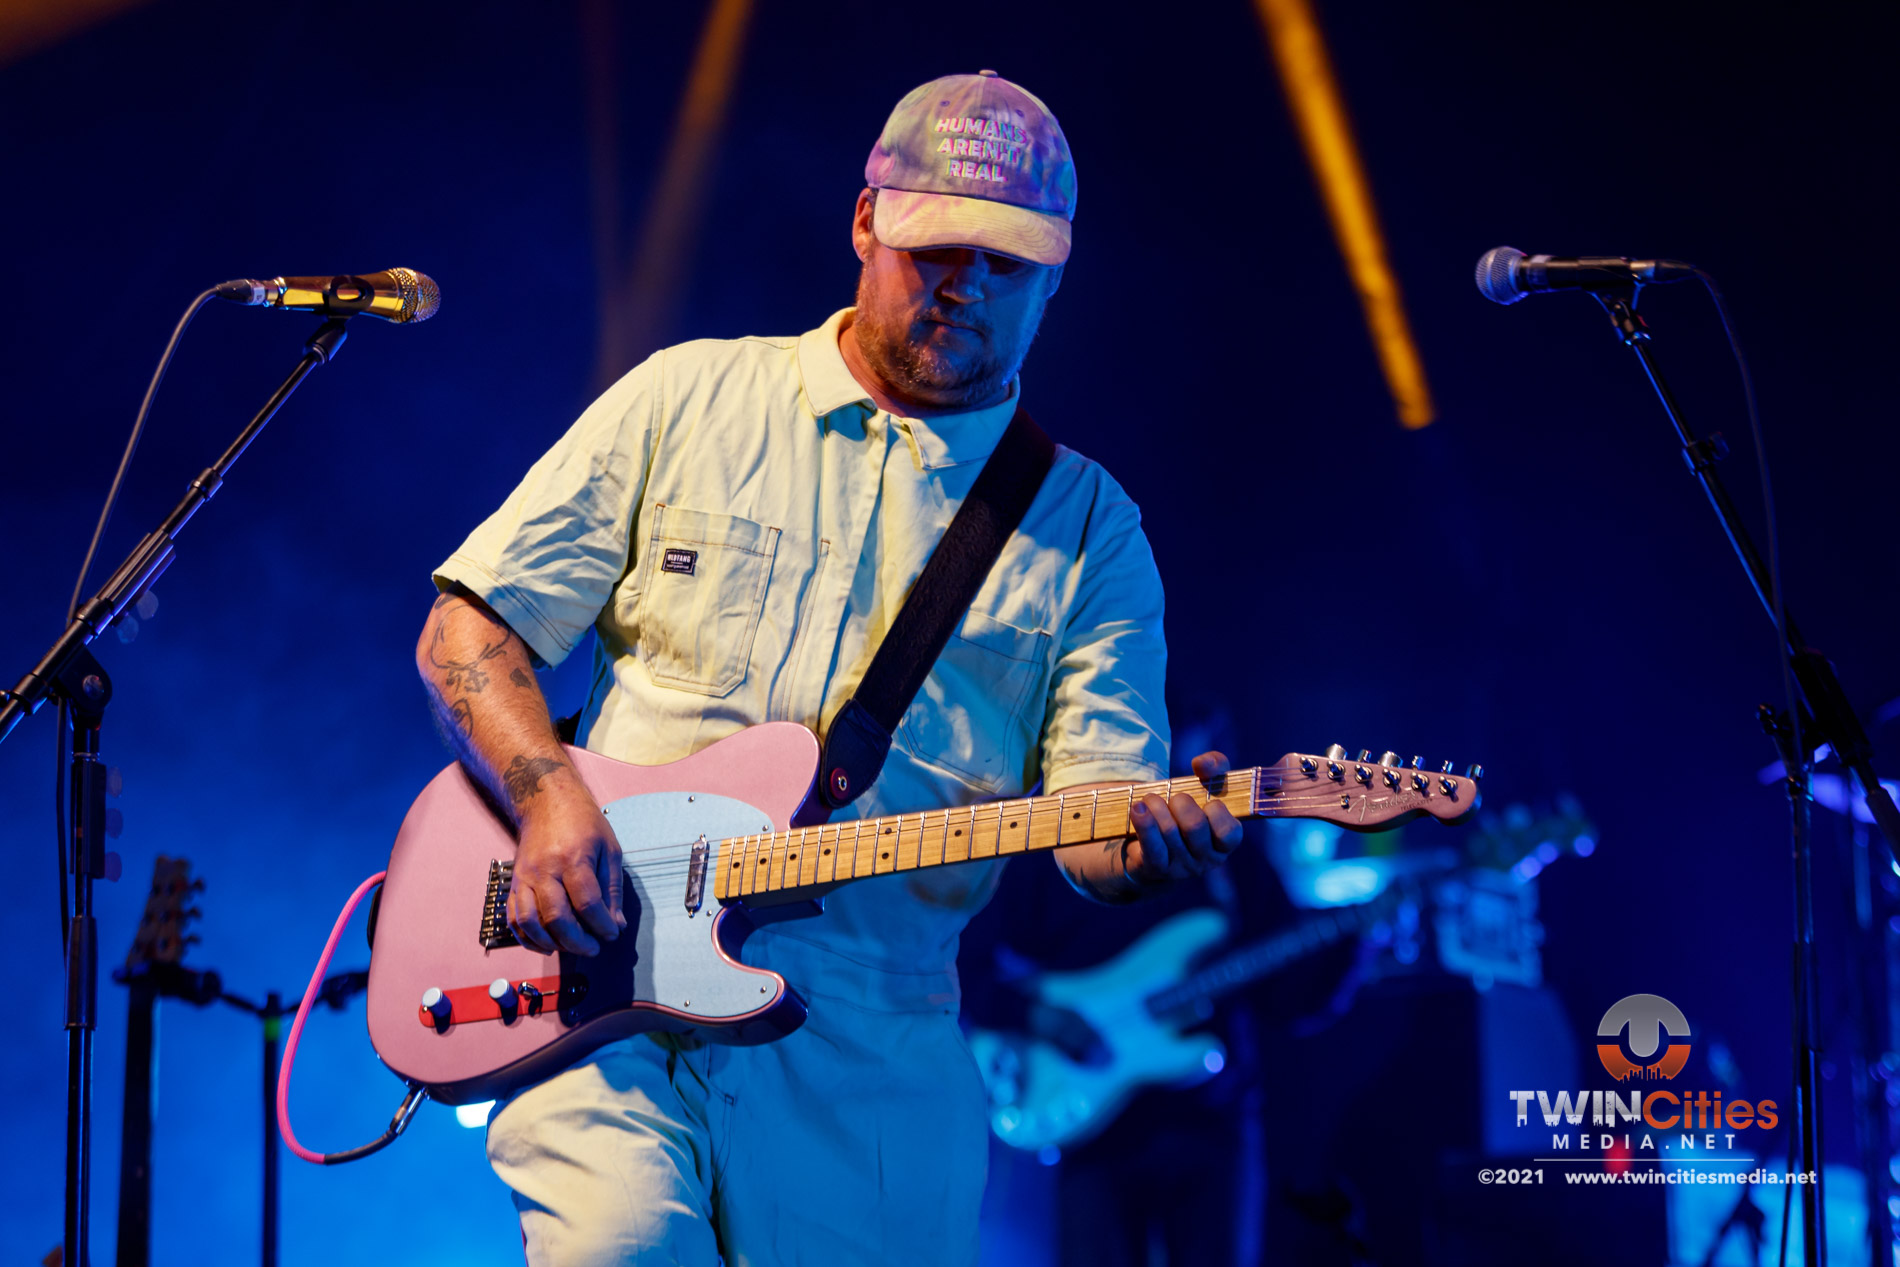 August 22, 2021 - Minneapolis, Minnesota, United States - Modest Mouse live in concert at the The Armory along with The Districts as the openers.

(Photo by Seth Steffenhagen/Steffenhagen Photography)